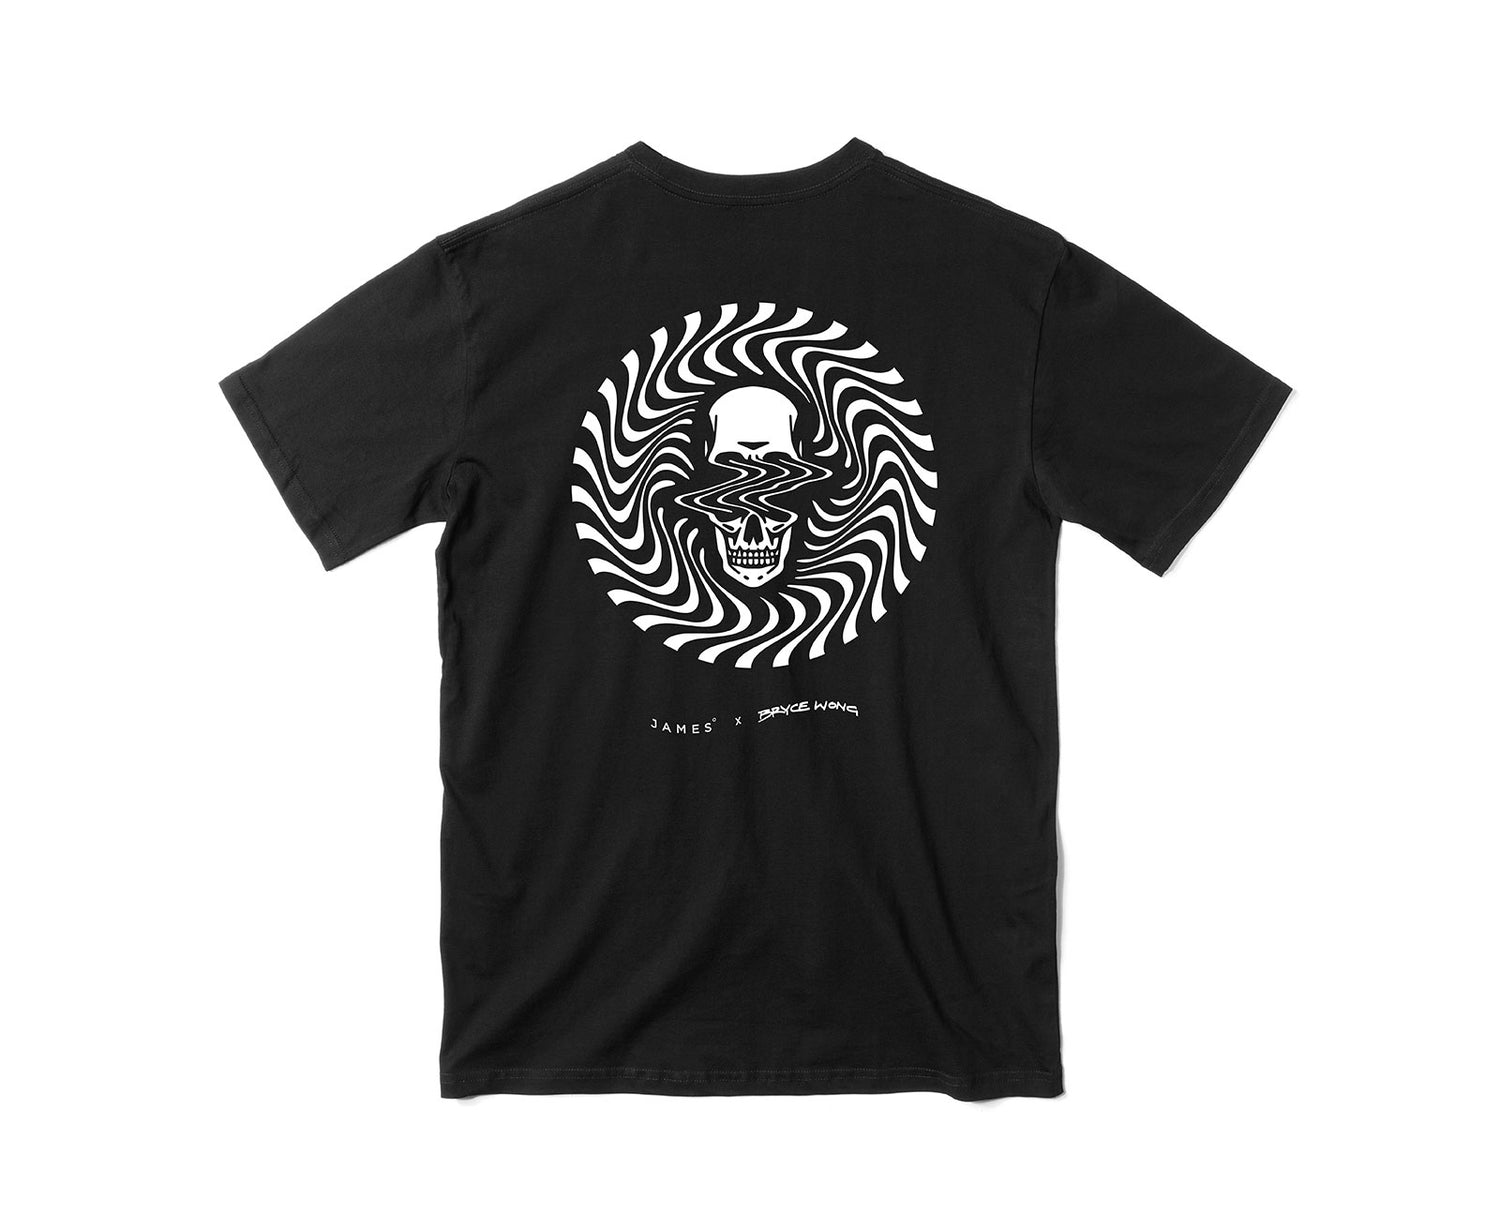 Bryce Wong black t-shirt with white graphics.